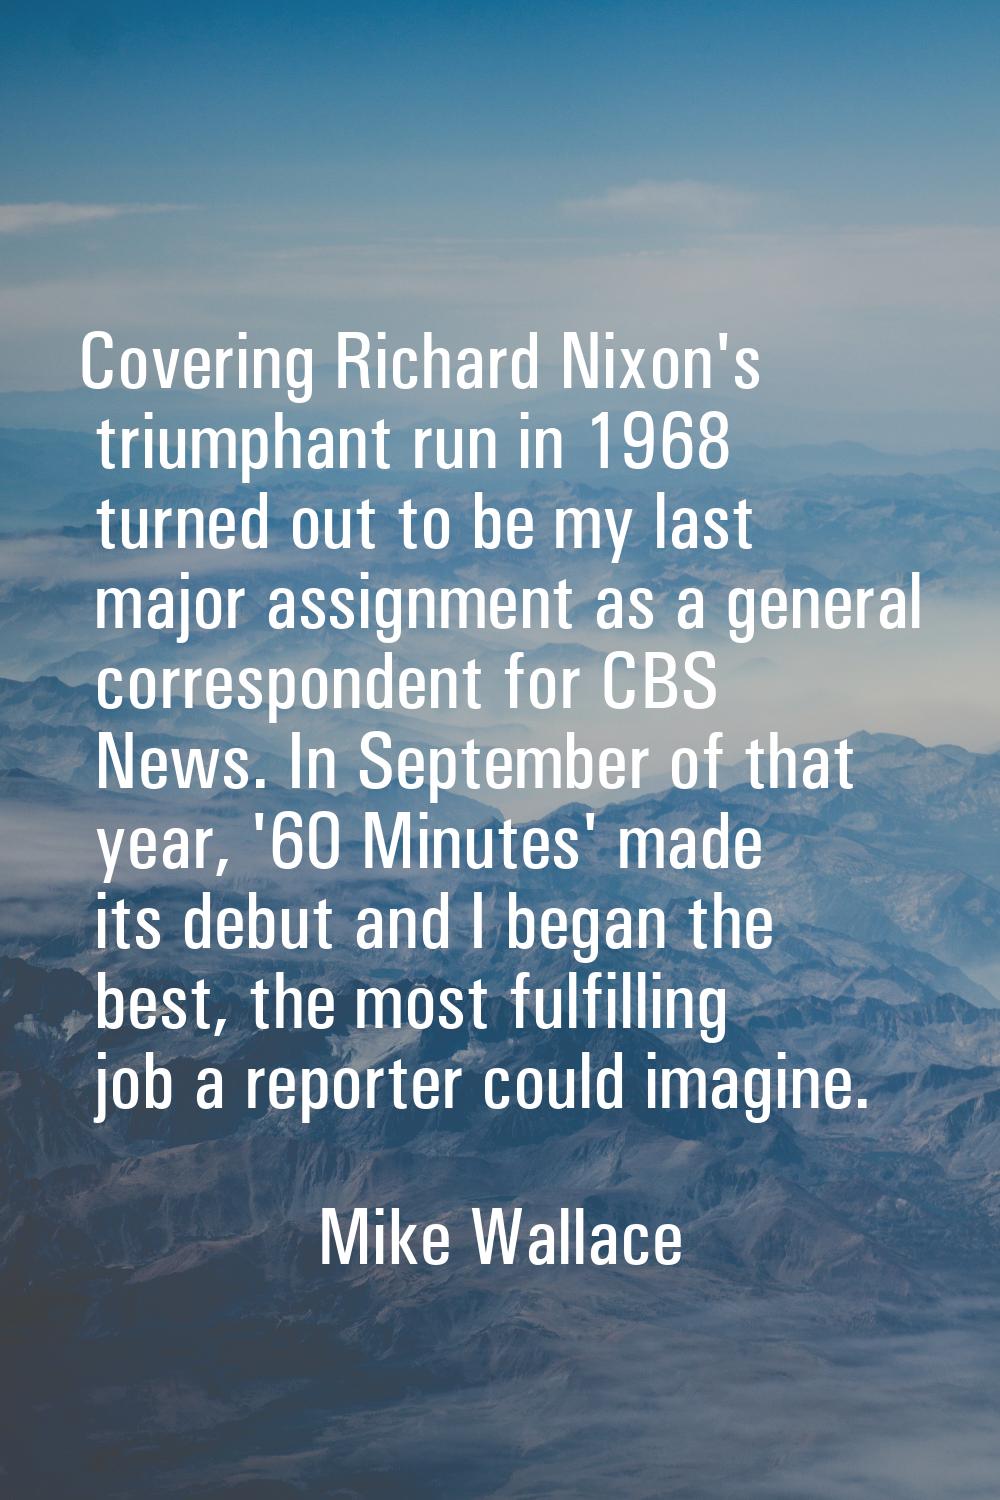 Covering Richard Nixon's triumphant run in 1968 turned out to be my last major assignment as a gene